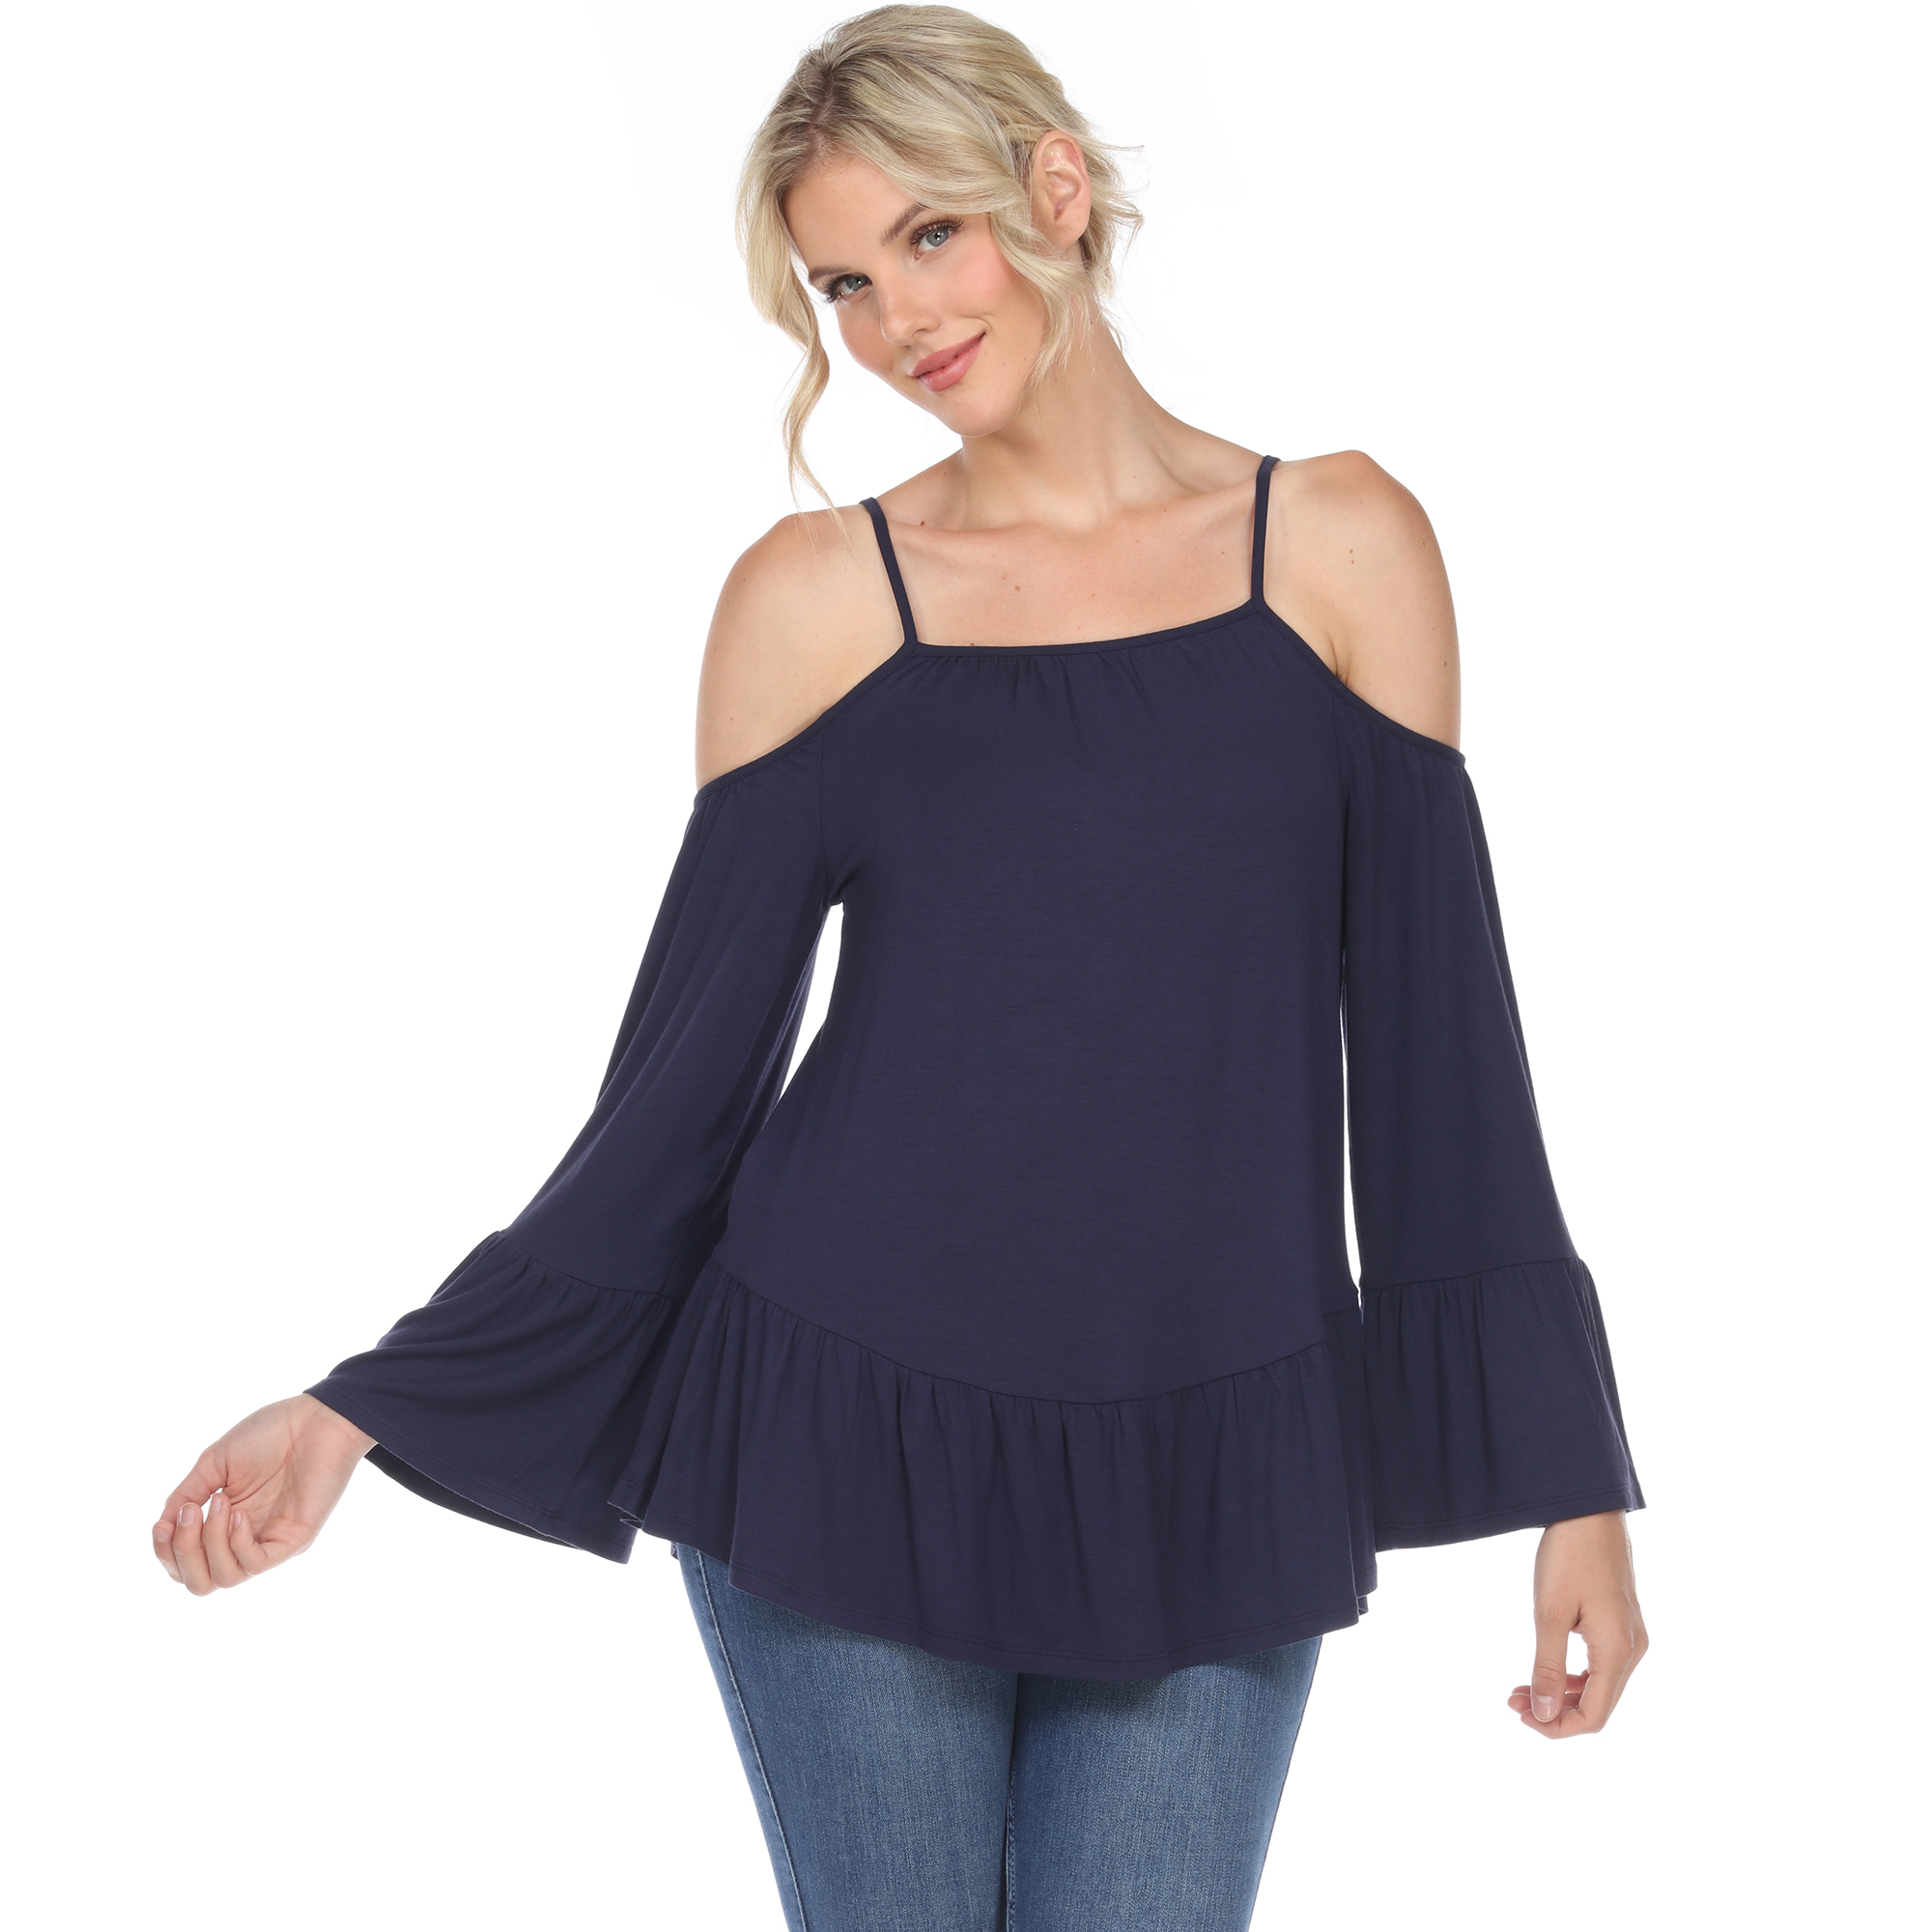 White Mark Women's Cold Shoulder Ruffle Sleeve Top - Navy, 2X